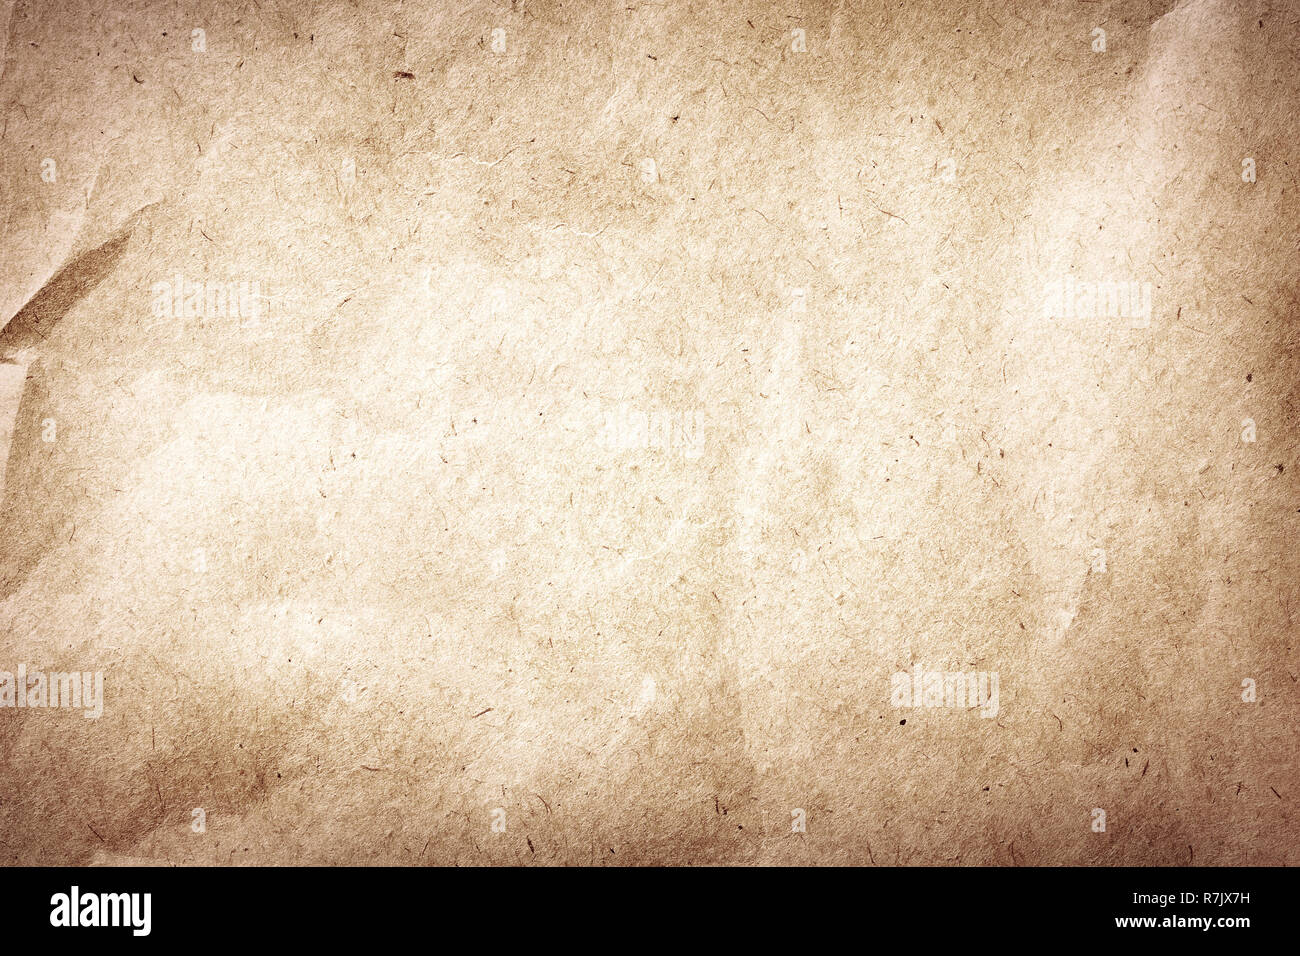 Make your designs stand out with beautiful Crumpled paper background vintage High-quality, free for 